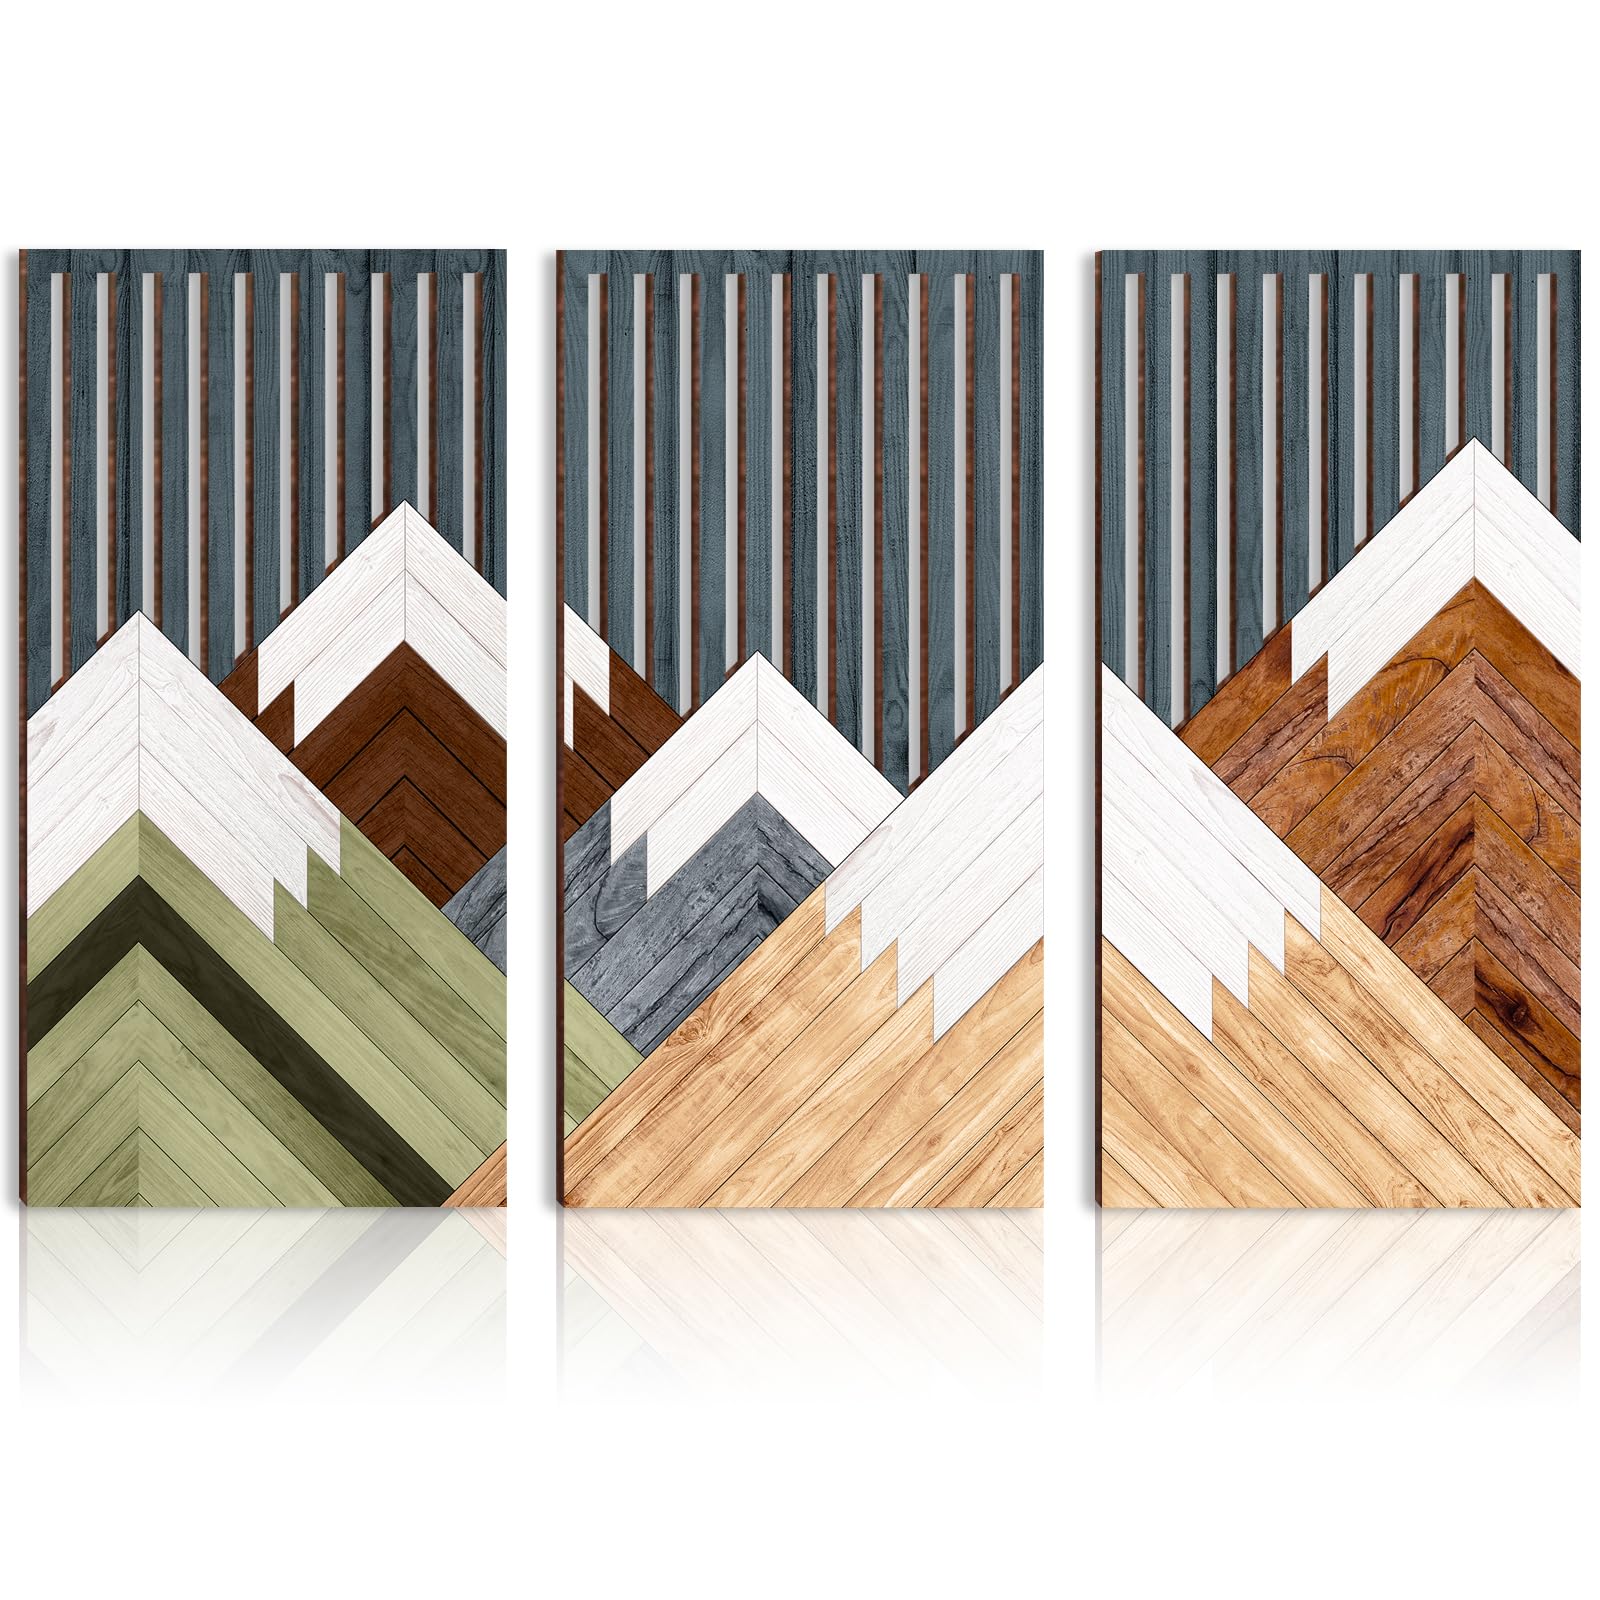 Mua IARTTOP Abstract Mountain Wall Art Geometric Forest Nature ...